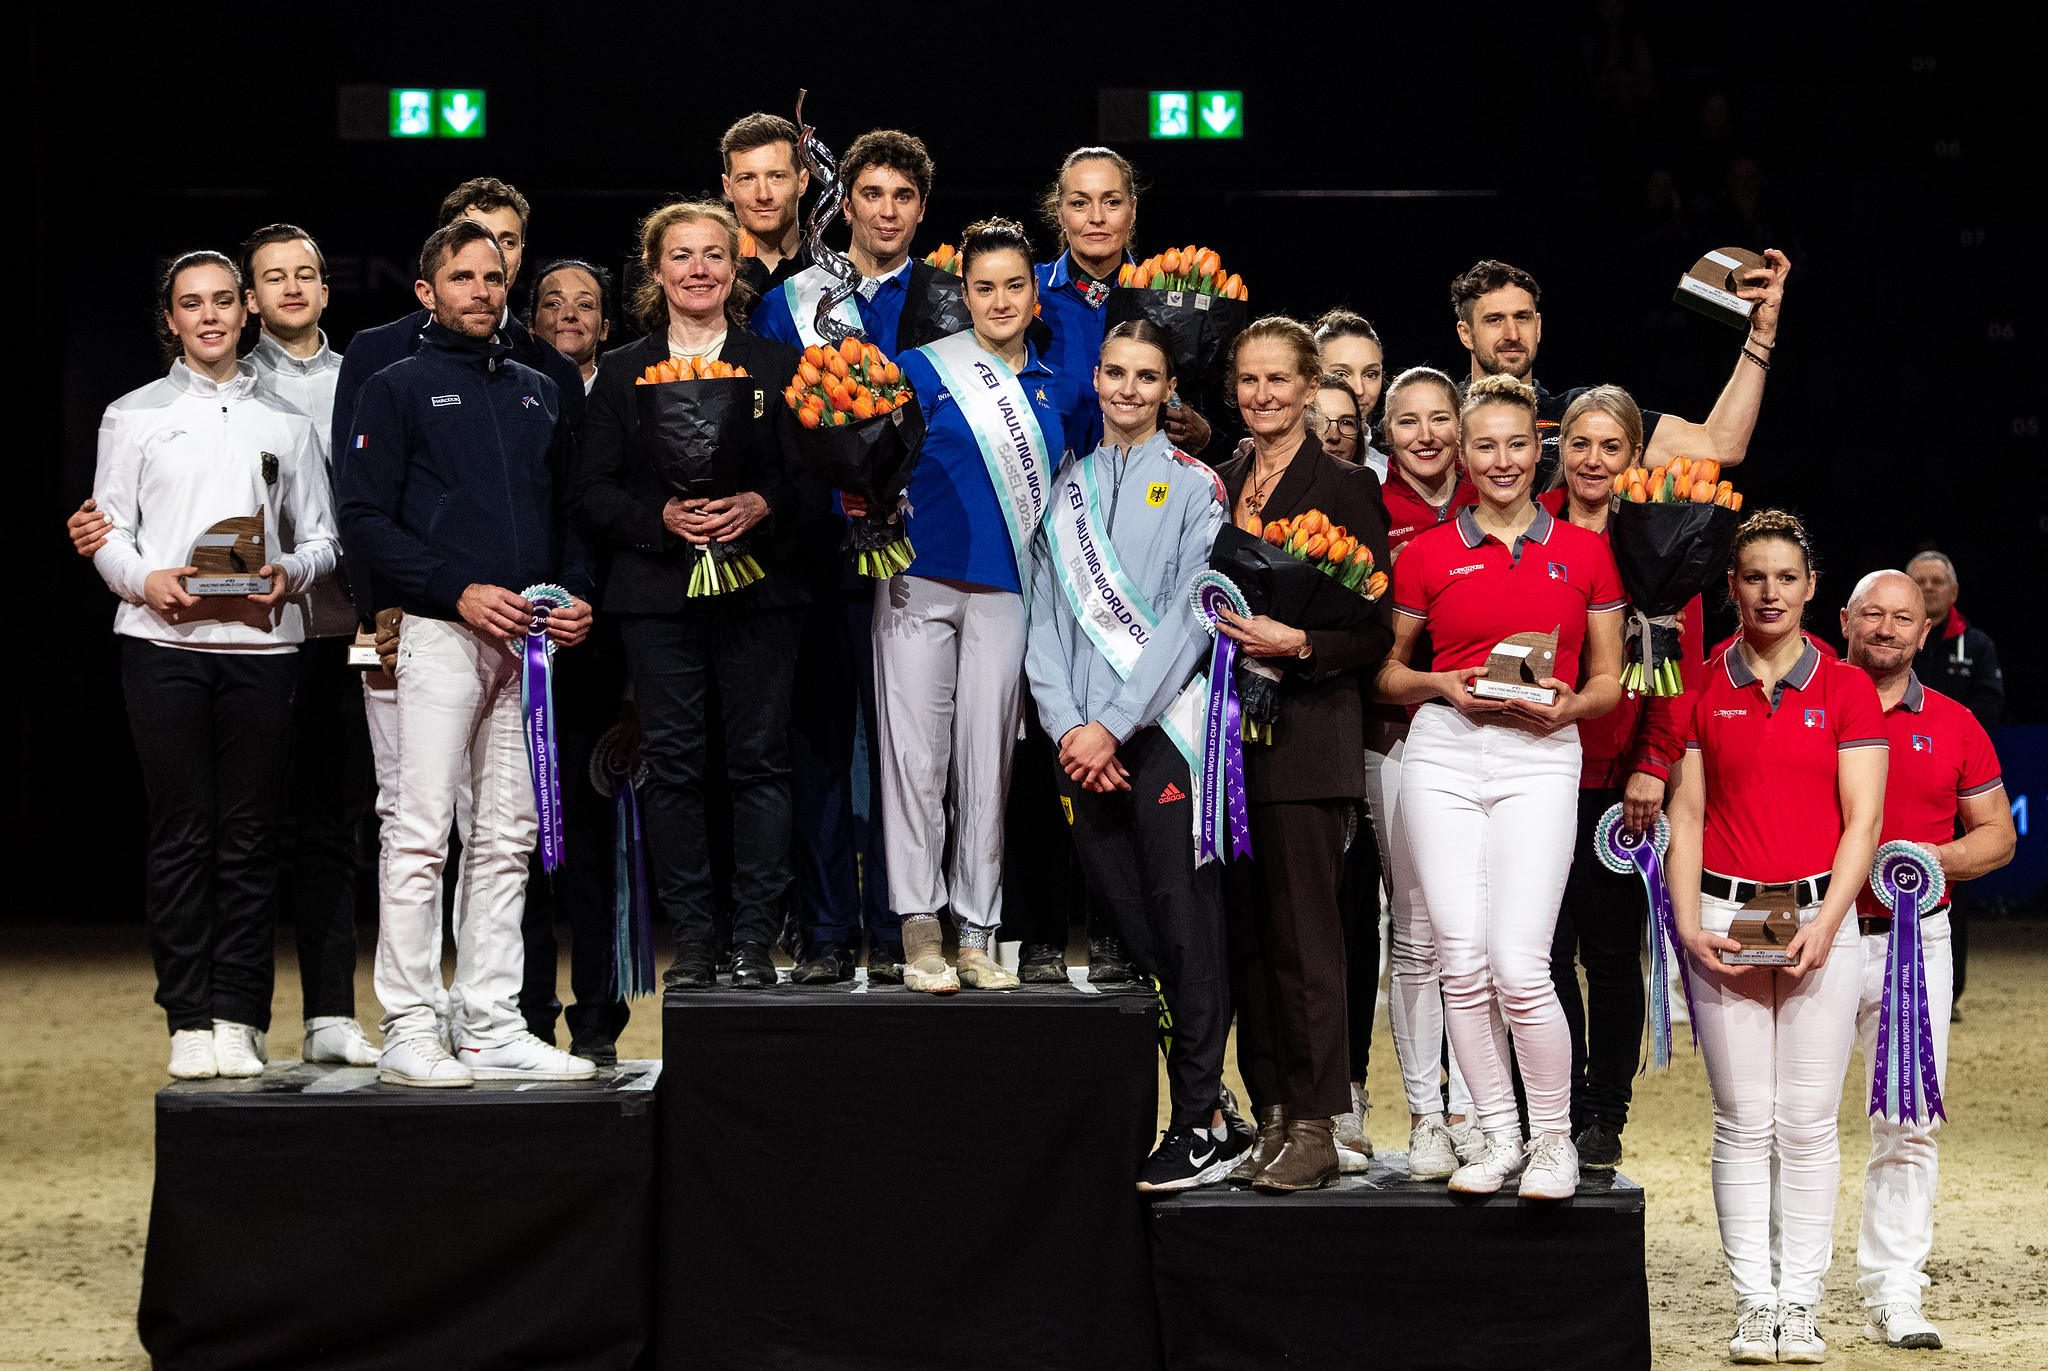 FEI Vaulting World Cup™ Final 2024 Basel, Switzerland All medalists pose for a photo at the prize giving ceremony for the FEI Vaulting World Cup Final 2024 in Basel, Switzerland, January 14, 2024.